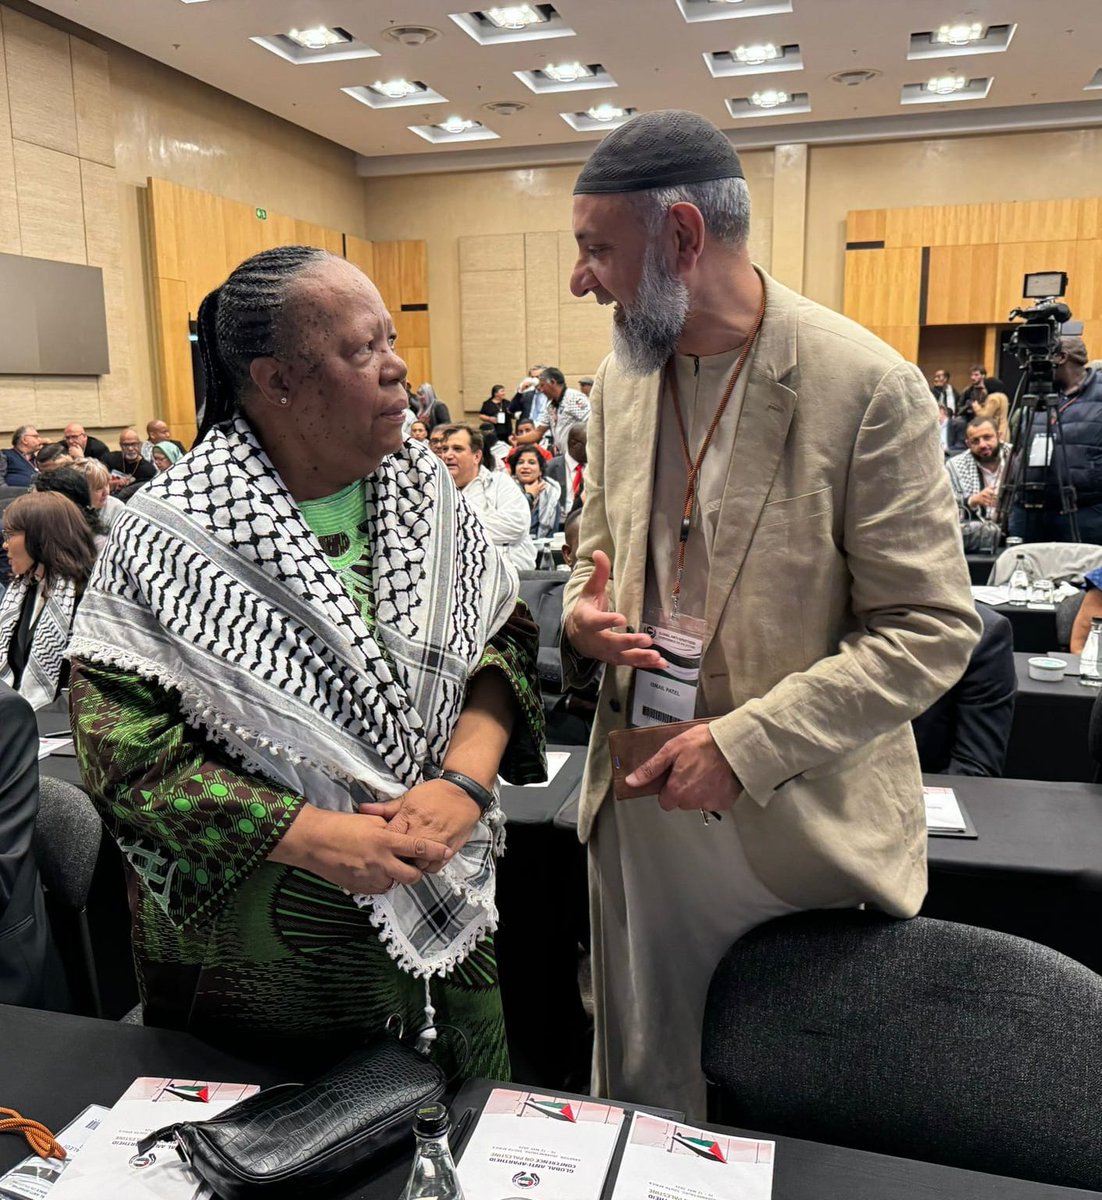 FOA Chair @Ismailadampatel at the anti-apartheid conference in South Africa with Minister N Pandor